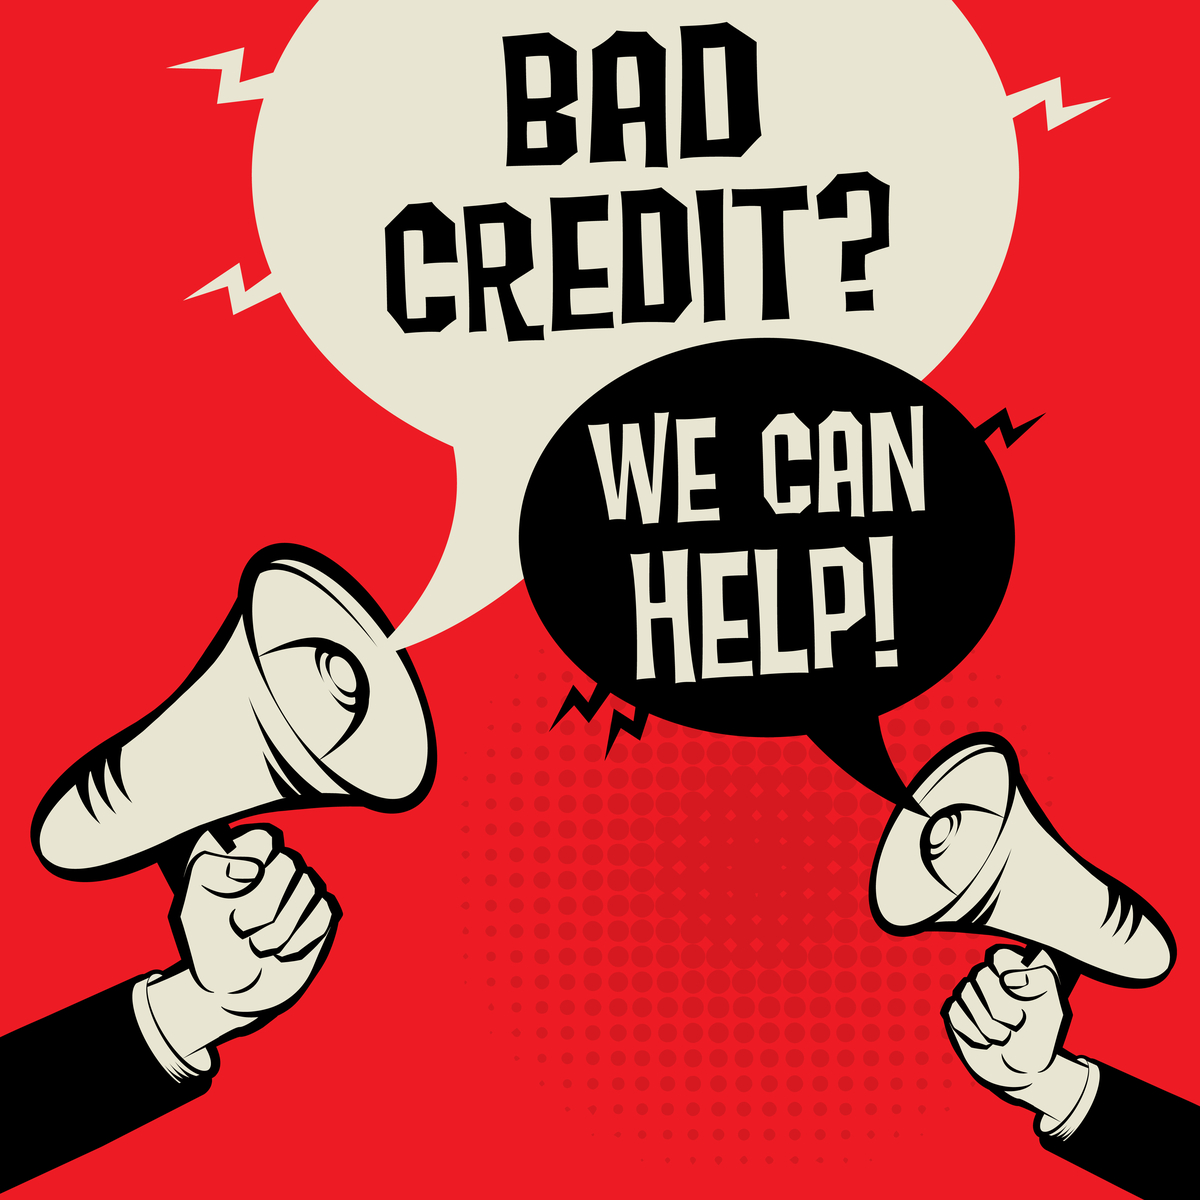 Can you get electricity with bad credit?